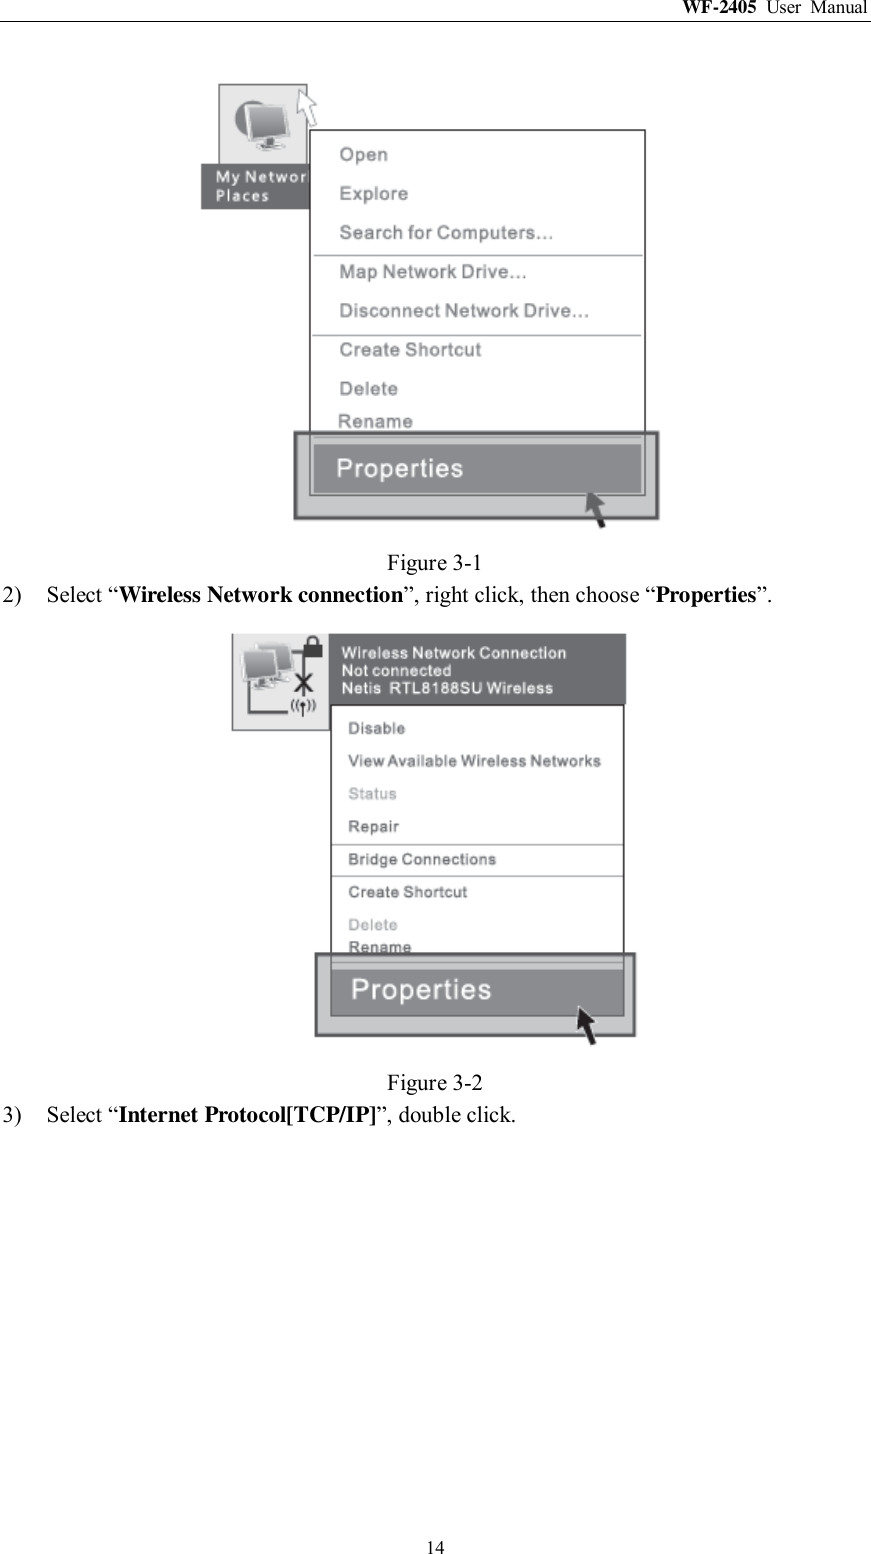 WF-2405  User  Manual  14  Figure 3-1 2) Select “Wireless Network connection”, right click, then choose “Properties”.  Figure 3-2 3) Select “Internet Protocol[TCP/IP]”, double click. 